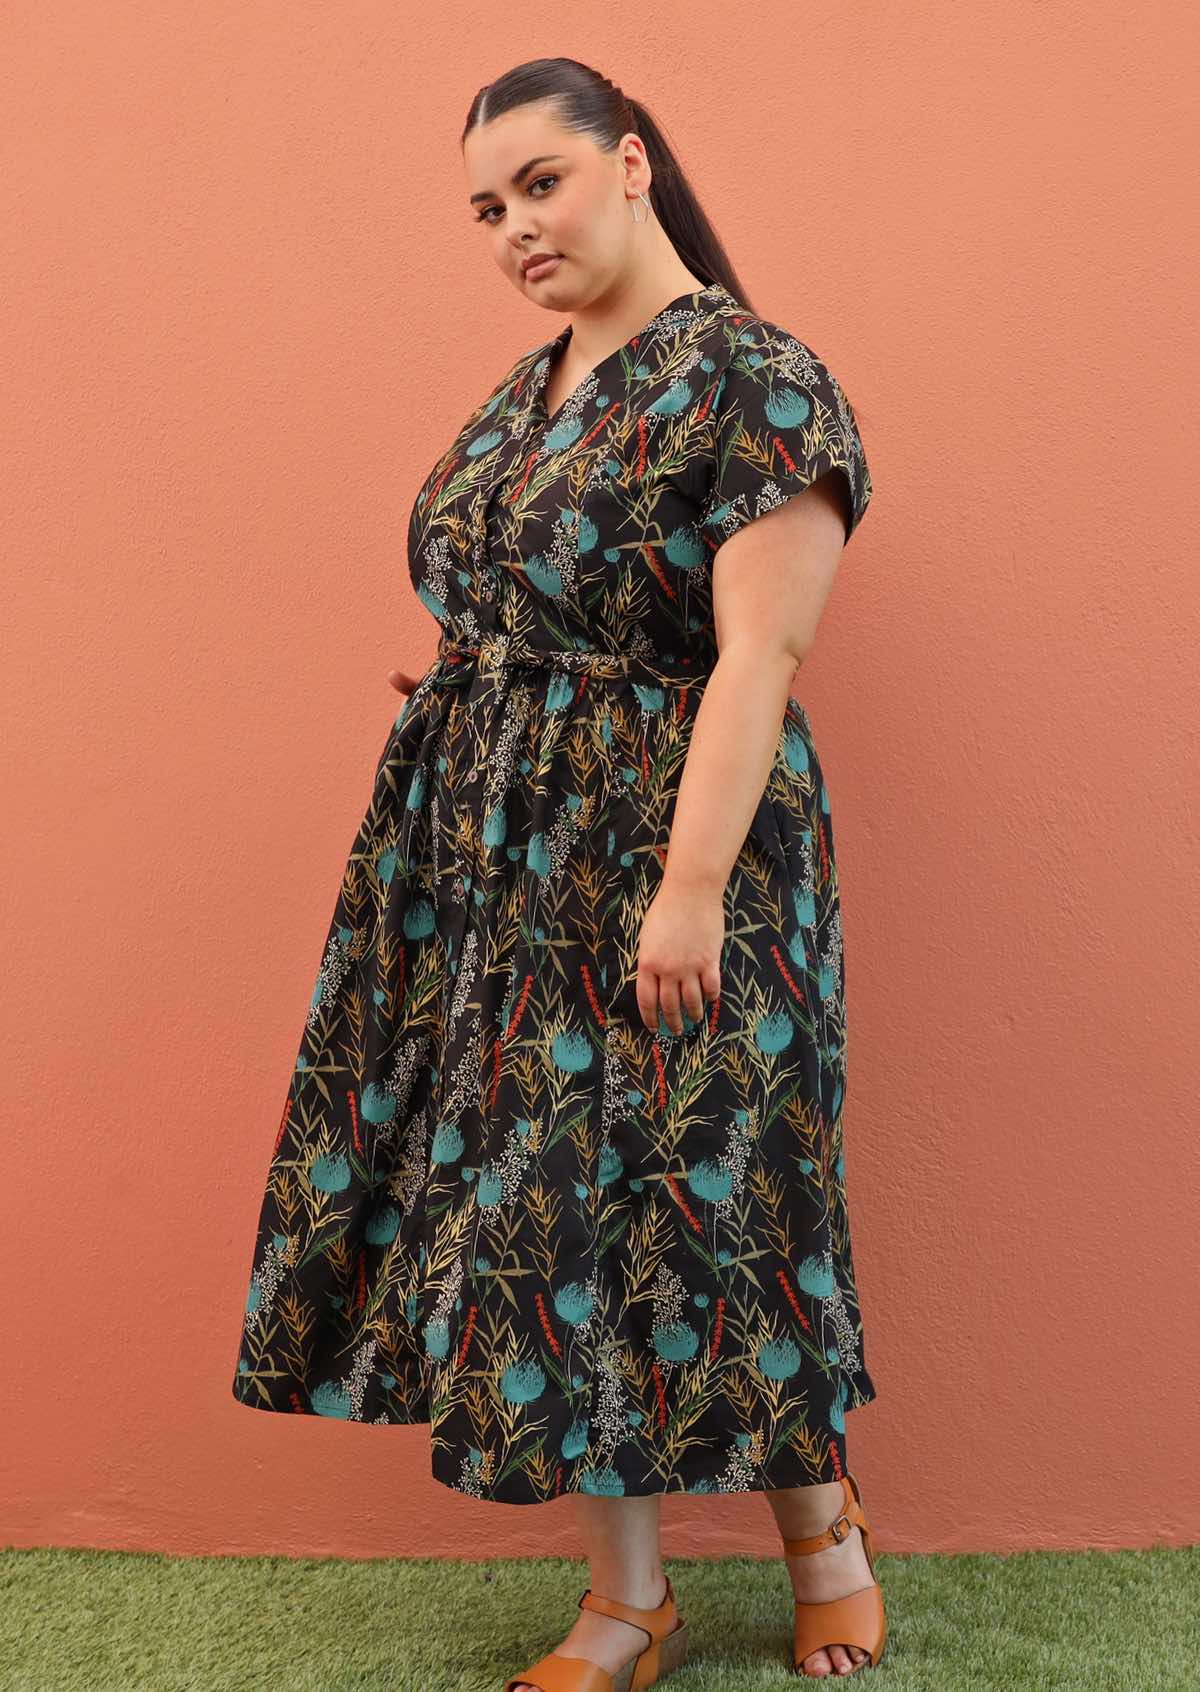 Plus size model wearing Vivien dress in black and teal with pockets